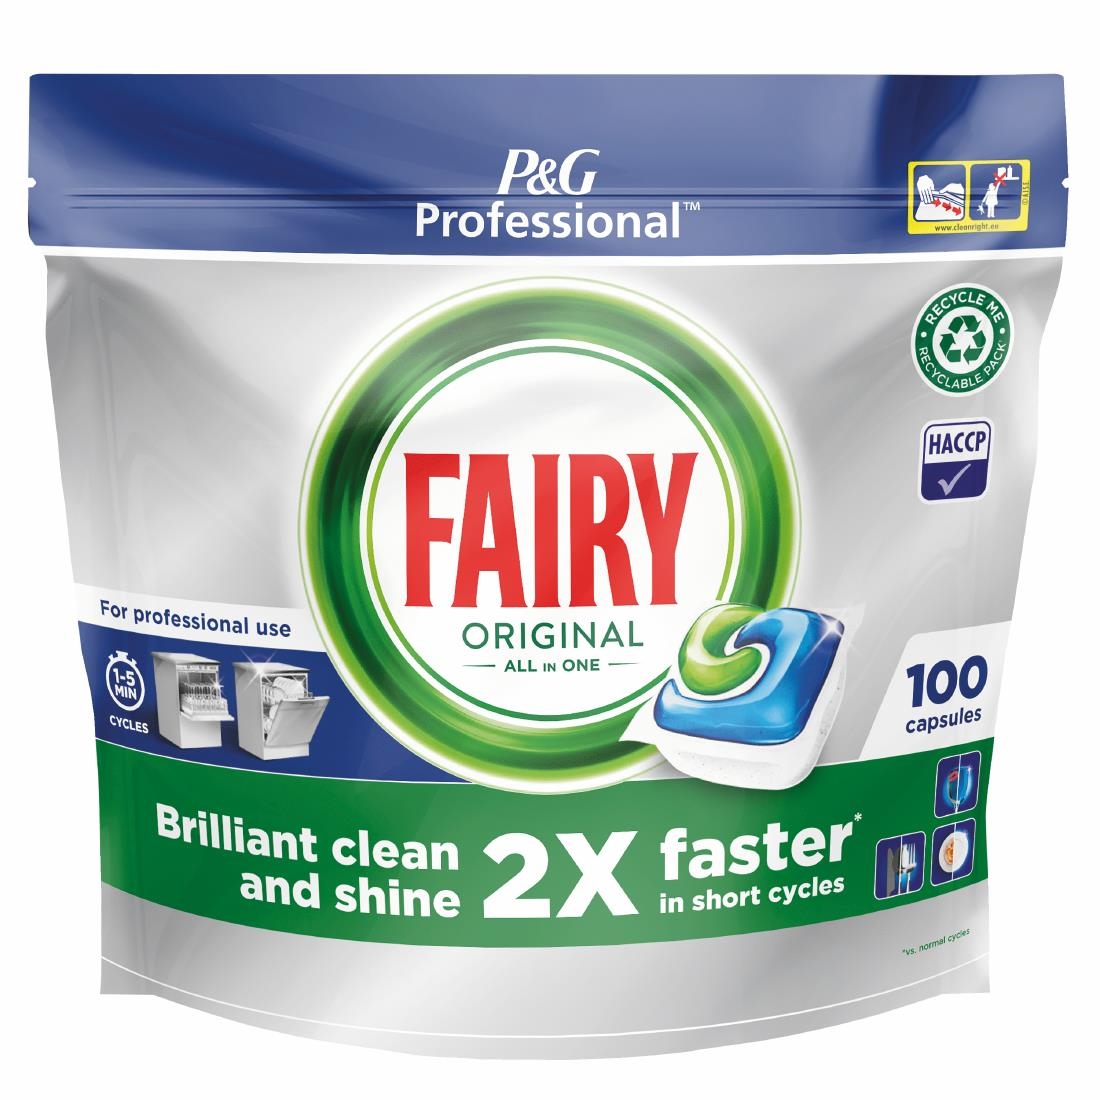 Fairy Professional Original All-In-One Dishwasher Tablets Pack of 2 x 100 (DX546)